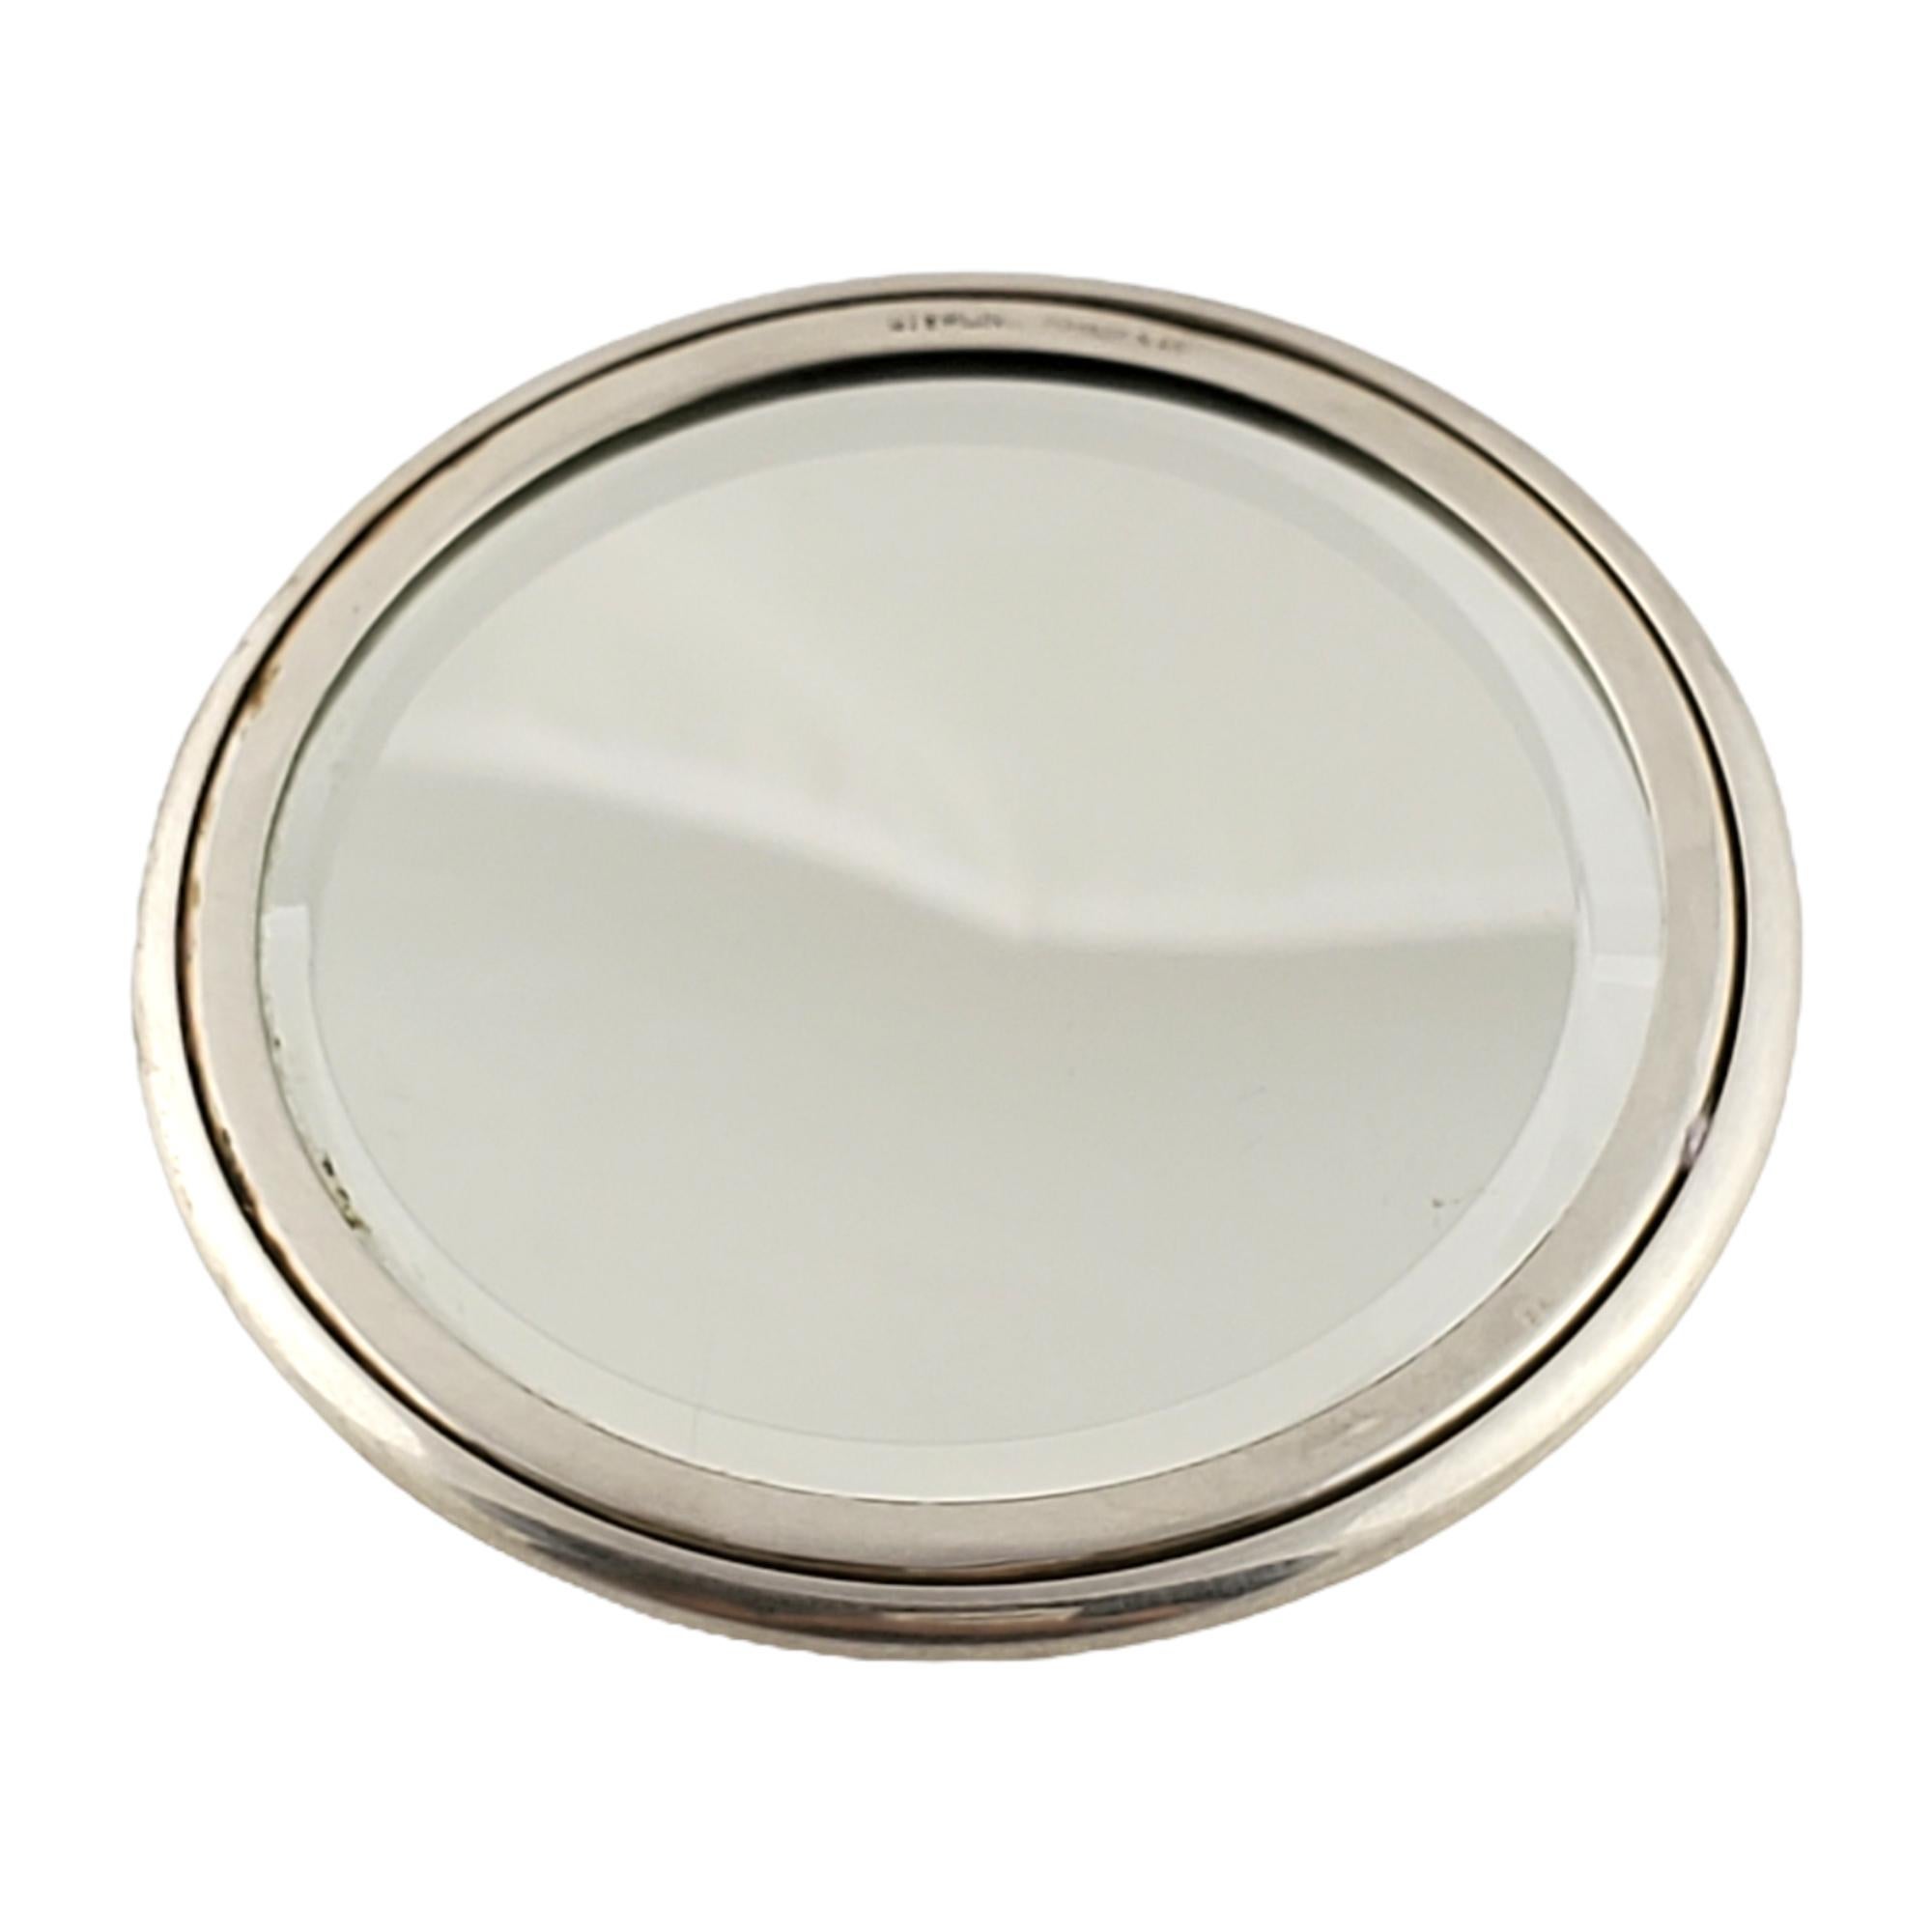 Tiffany & Co Sterling Silver Round Purse Mirror with Monogram.

Monogram appears to be SKD

Authentic Tiffany small round mirror with smooth polished finish. Tiffany pouch and box not included.

Measures approx 2 3/4